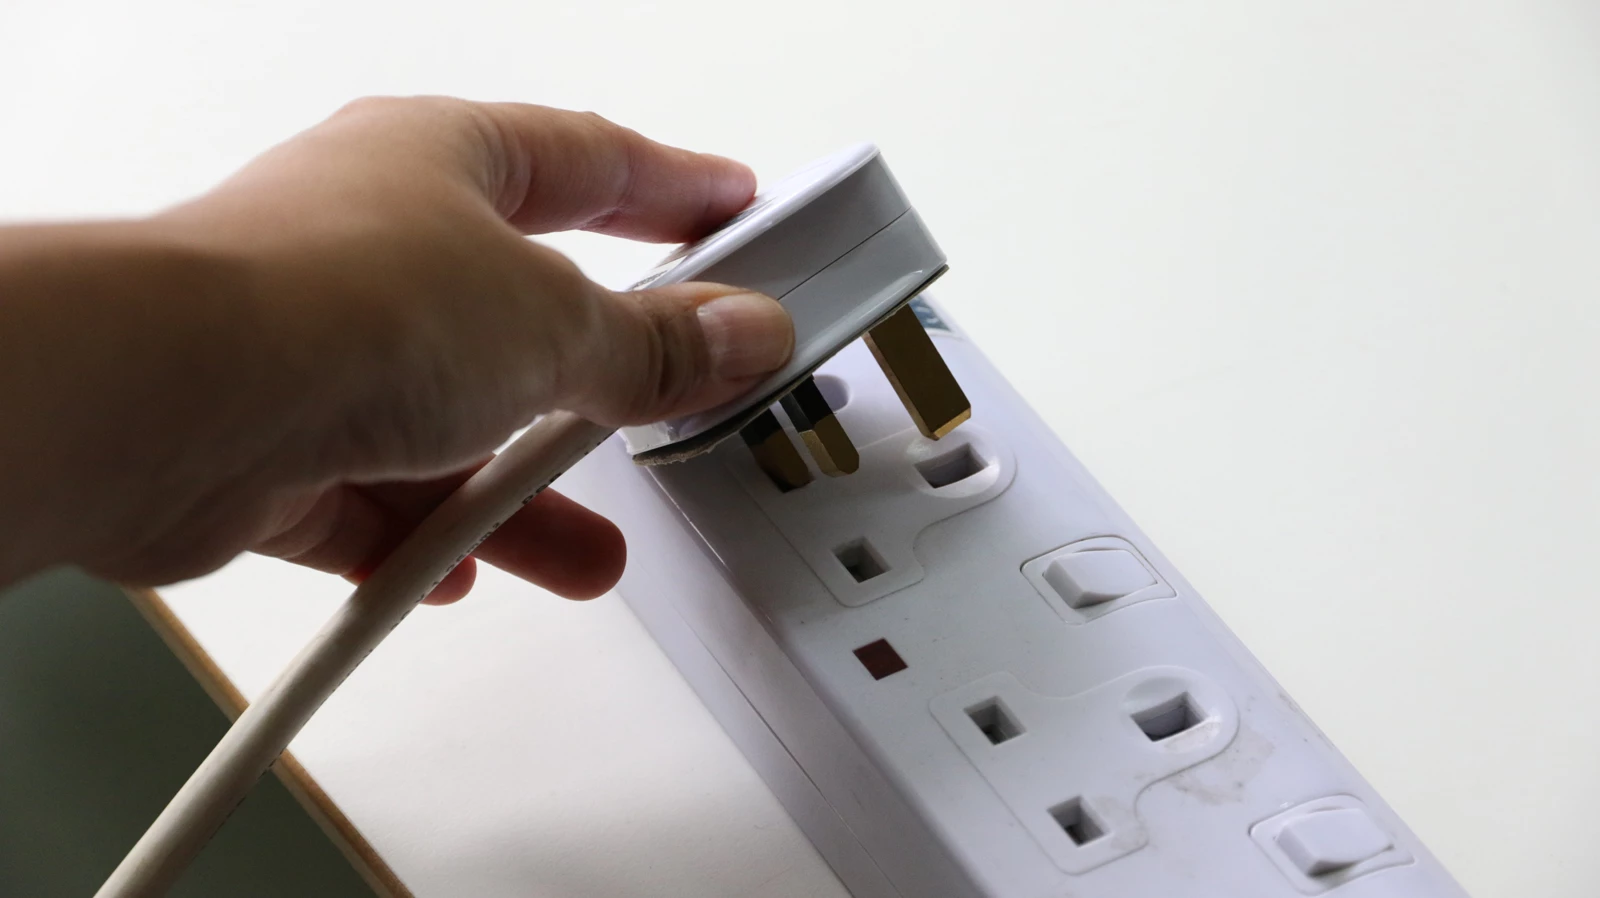 A person plugging an appliance into a multi-plug socket